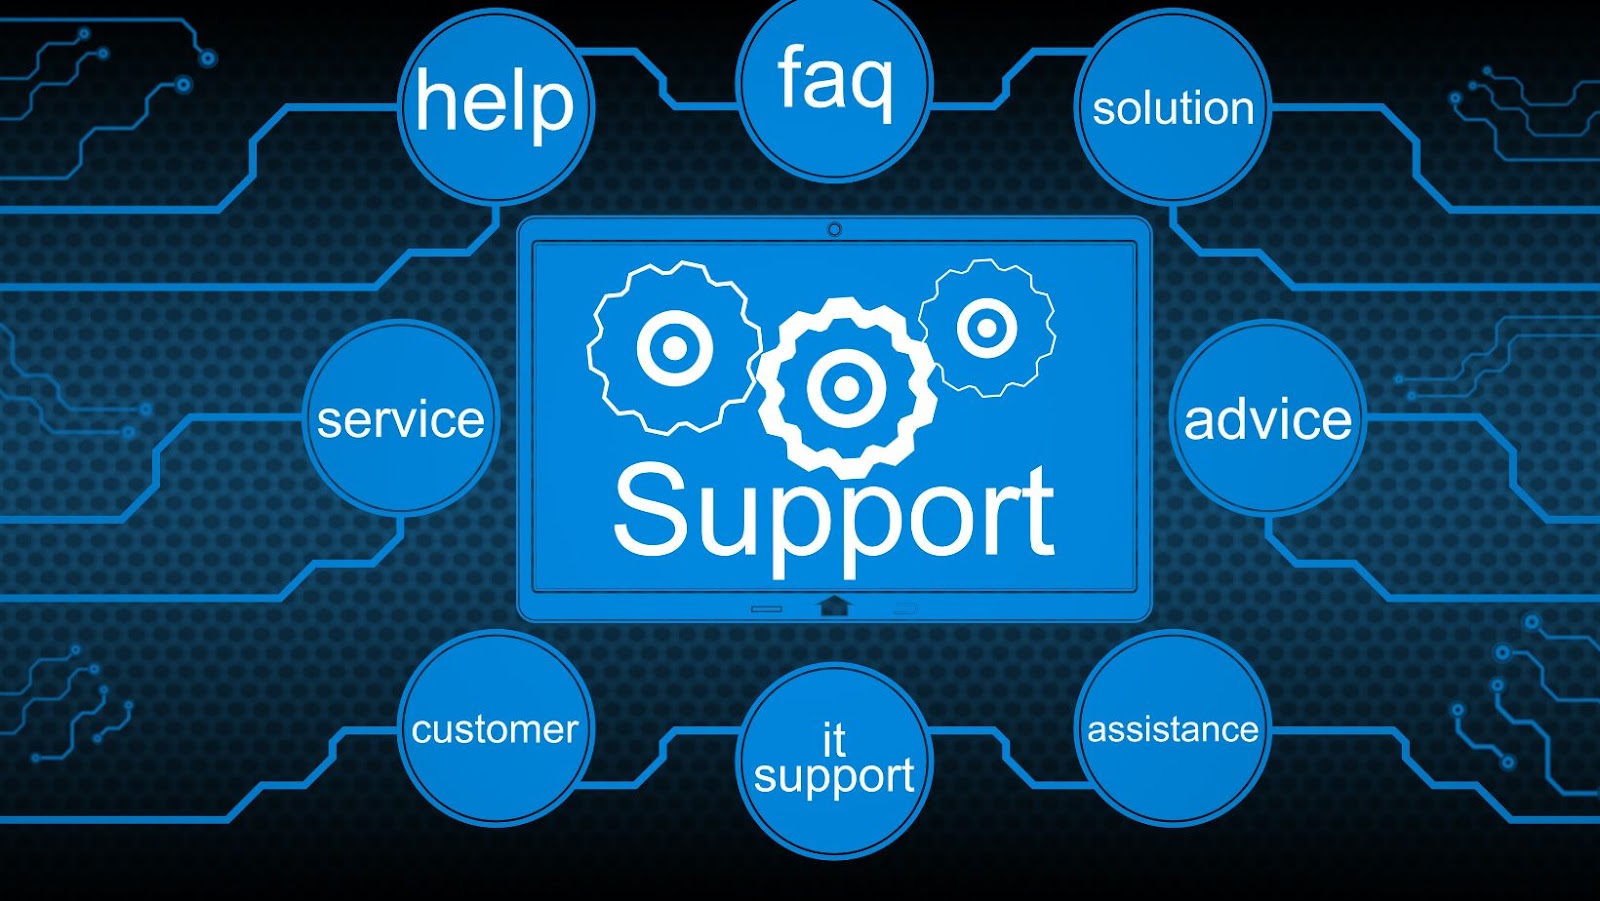 Anyway support. It support. It поддержка. Поддержка support. It support logo.